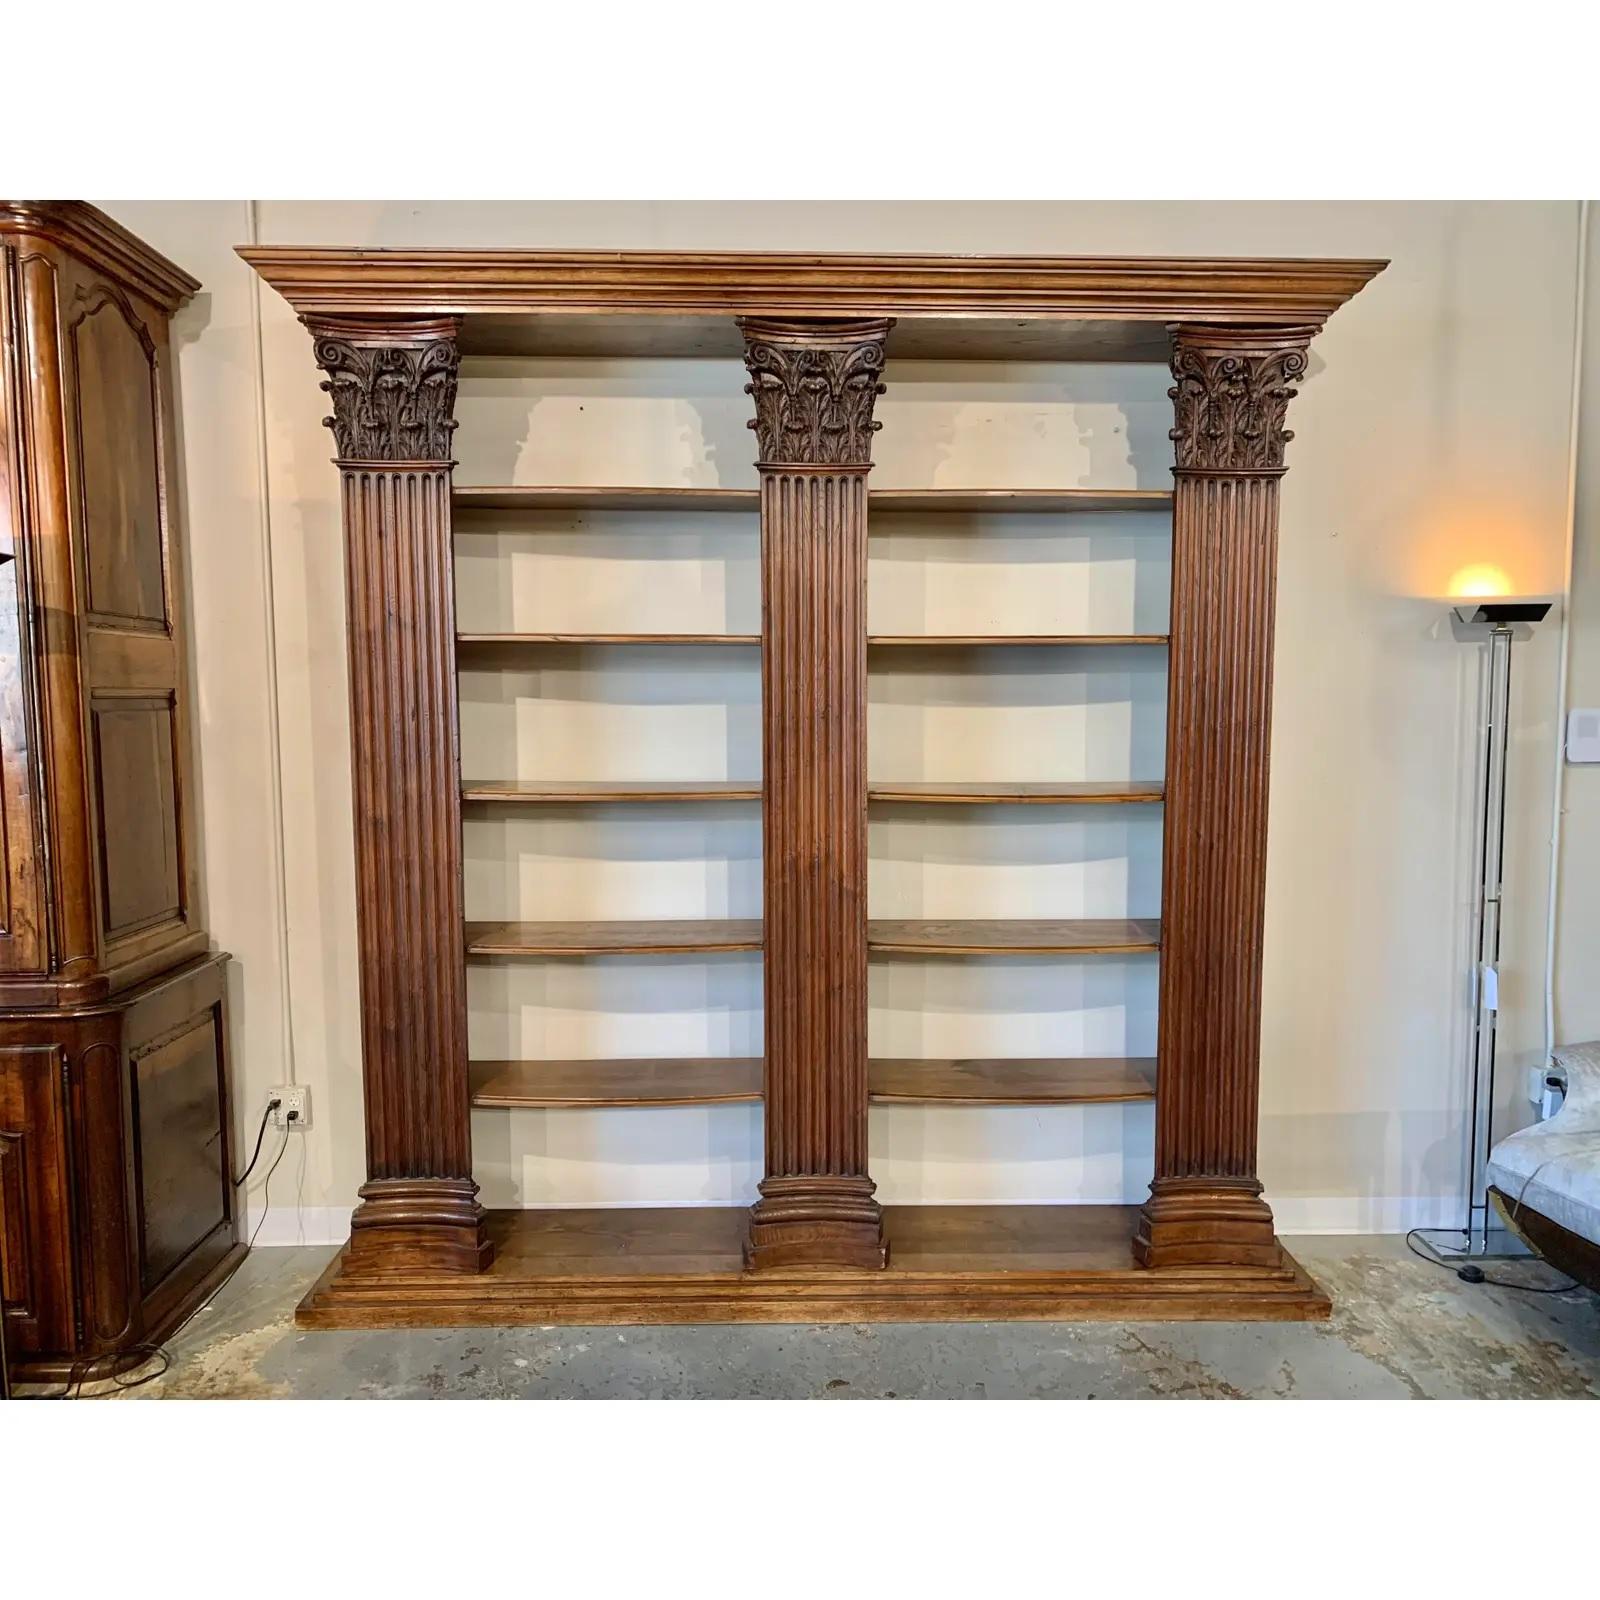 This handsome bookcase defines tradition and elegance with its superior build, handcrafted in France in the early 20th century using 18th century Corinthian hand carved walnut column facades. The columns are pegged on both the top and bottom to